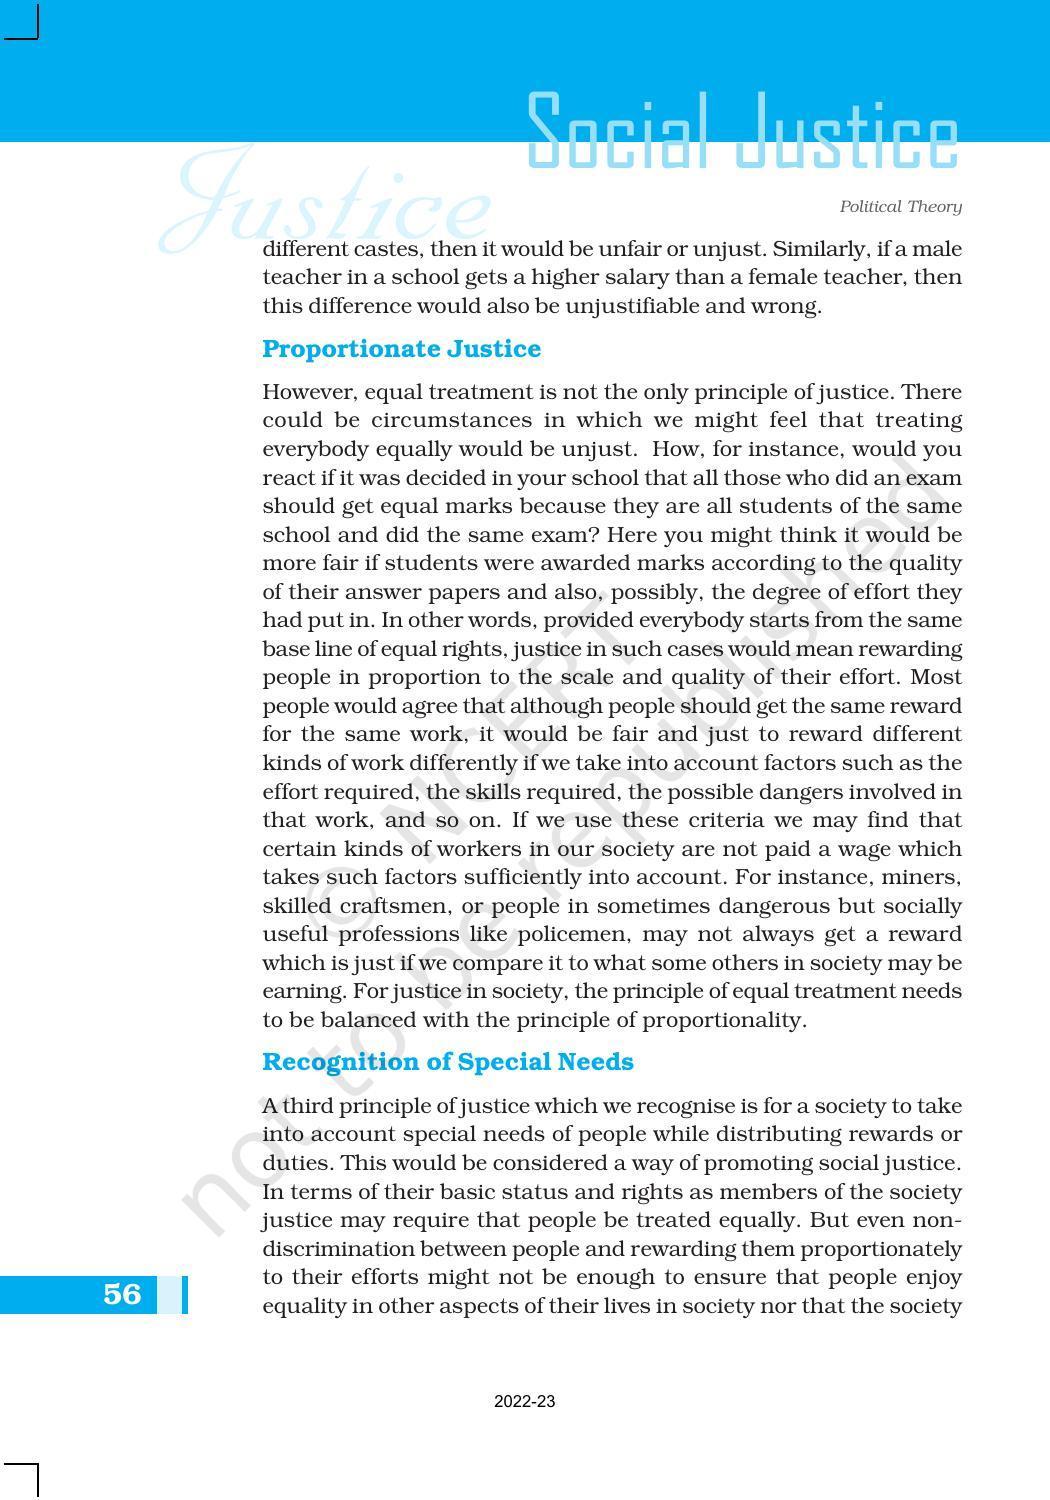 NCERT Book for Class 11 Political Science (Political Theory) Chapter 4 Social Justice - Page 4